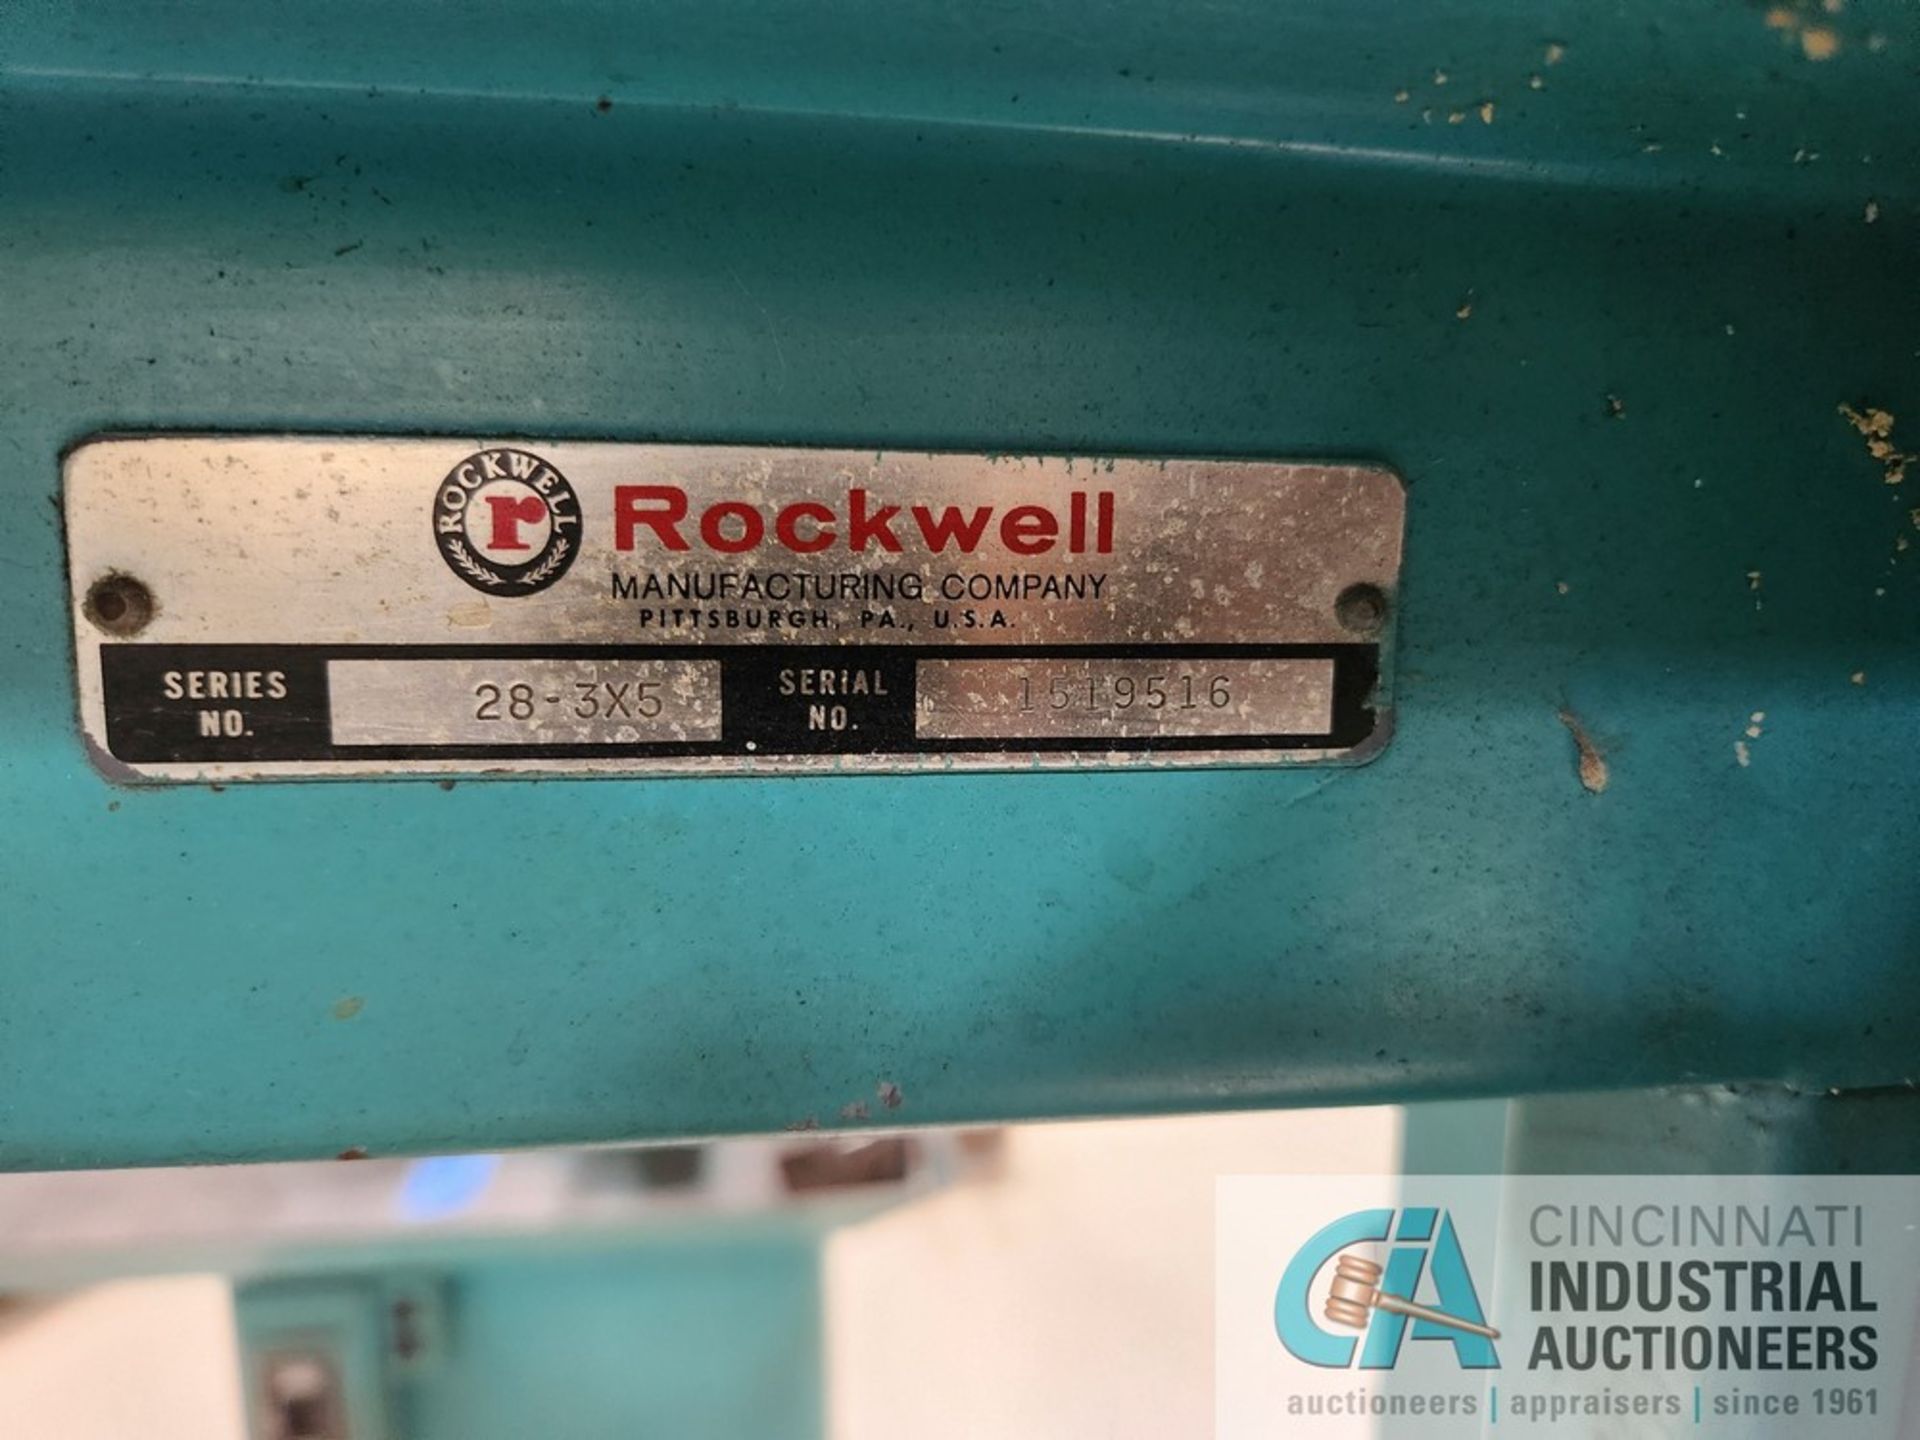 20" ROCKWELL SERIES 28-3X5 VERTICAL BAND SAW; S/N 15195/6, BLADE WELDER, 24" X 24" TABLE - Image 6 of 6